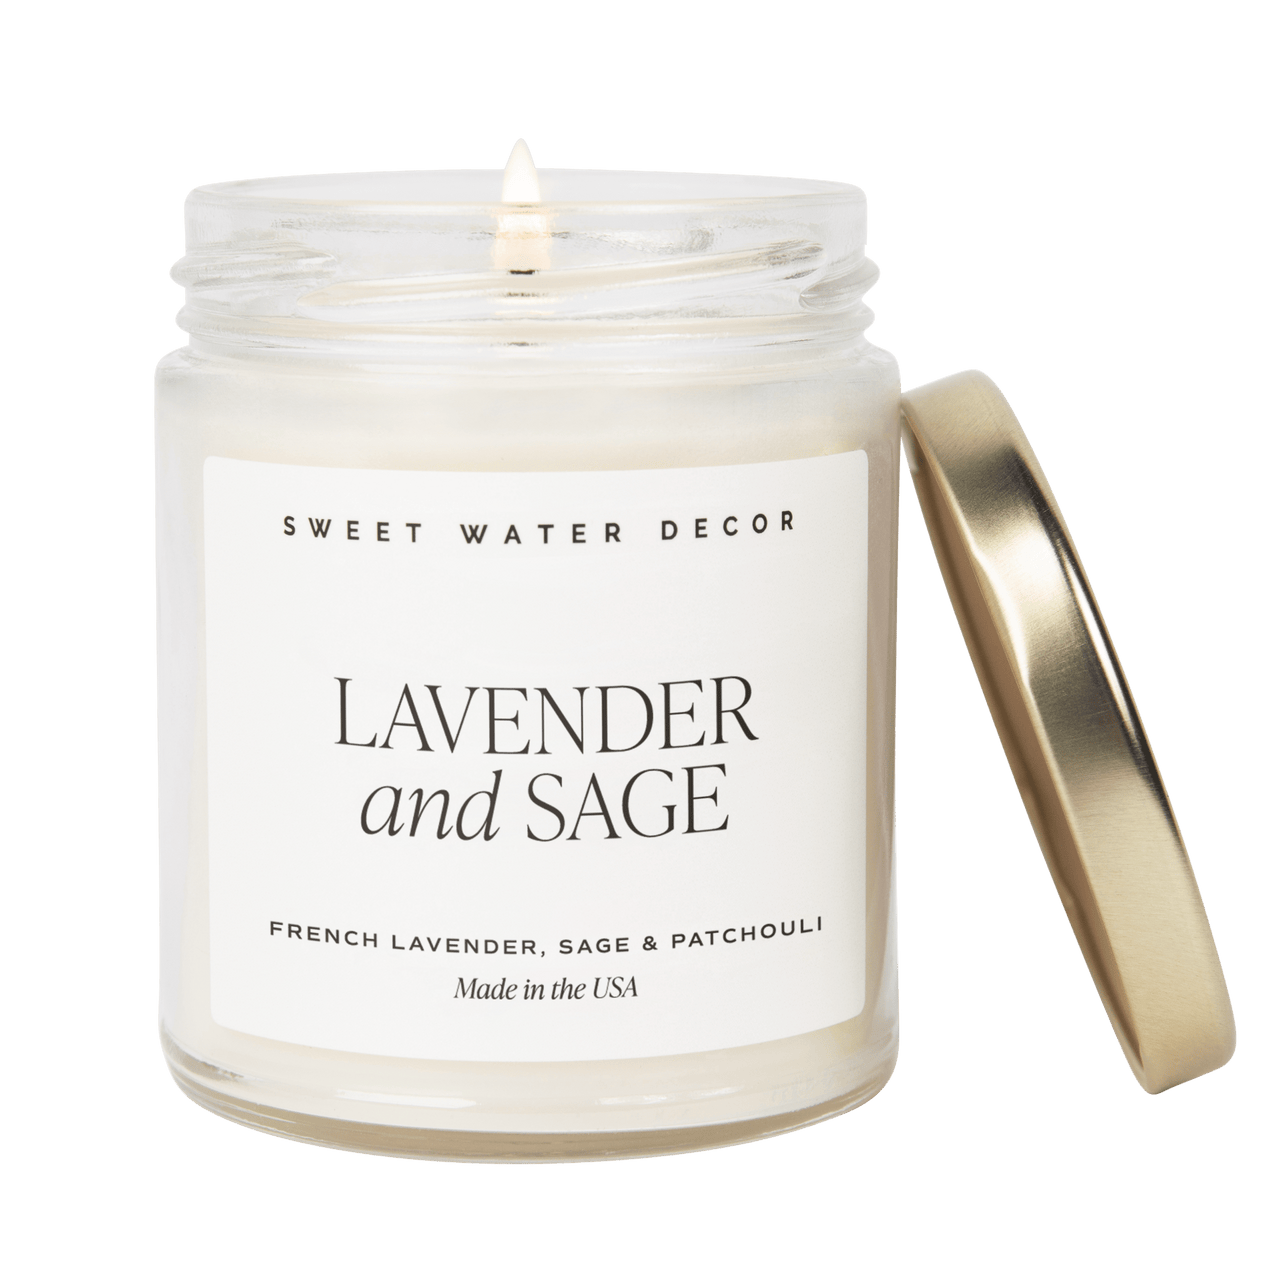 Lavender and Sage Soy Candle - Clear Jar - 9 oz - Tony's Home Furnishings